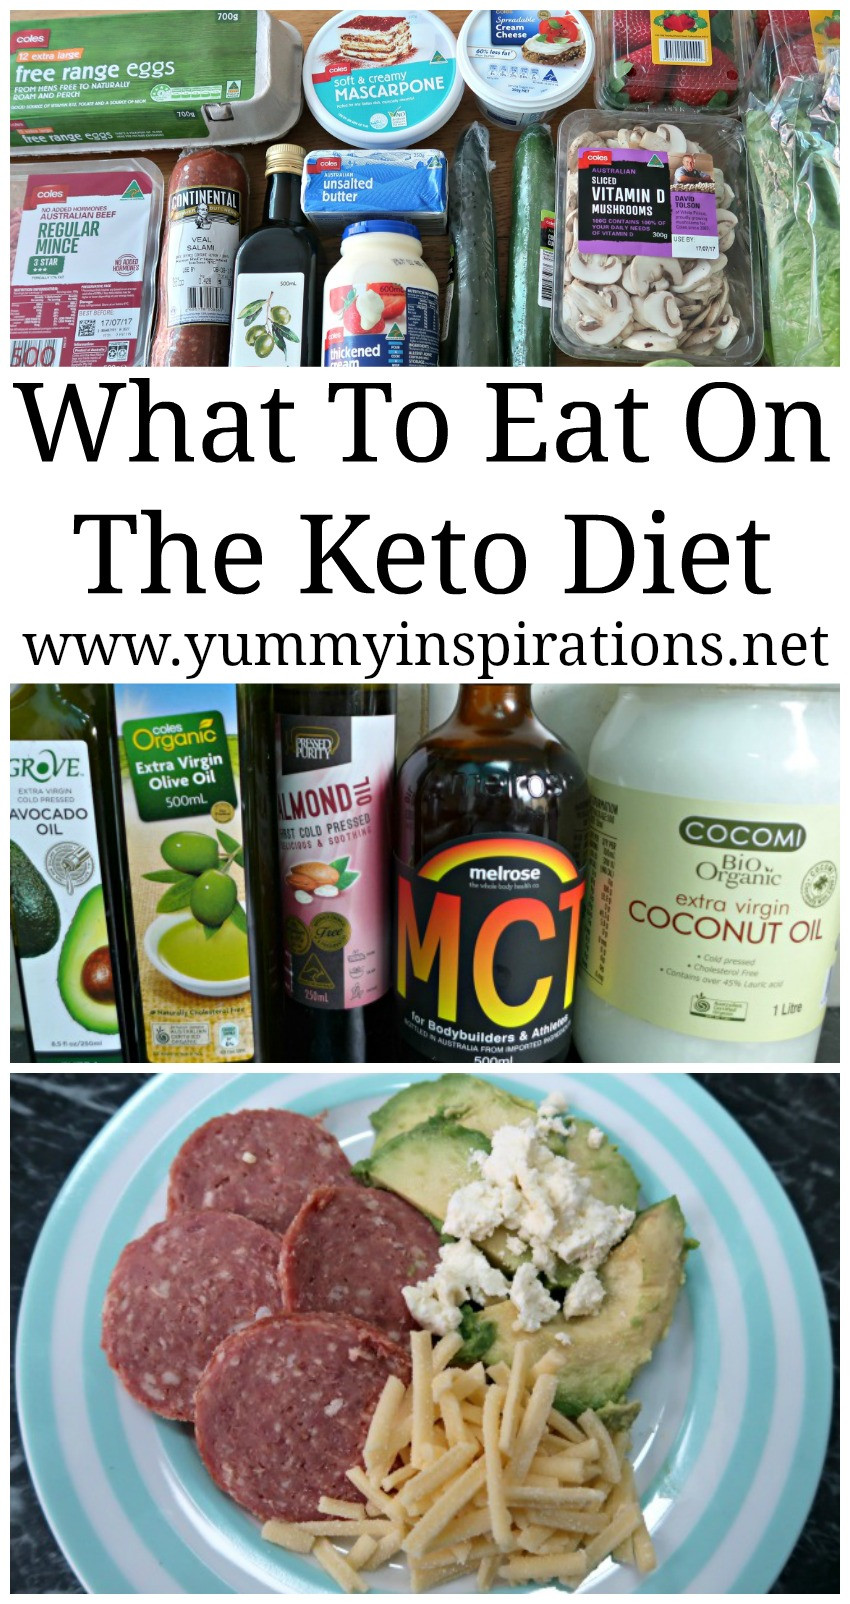 What To Eat On Keto Diet Meals
 What To Eat A Ketogenic Diet What to eat on the Low